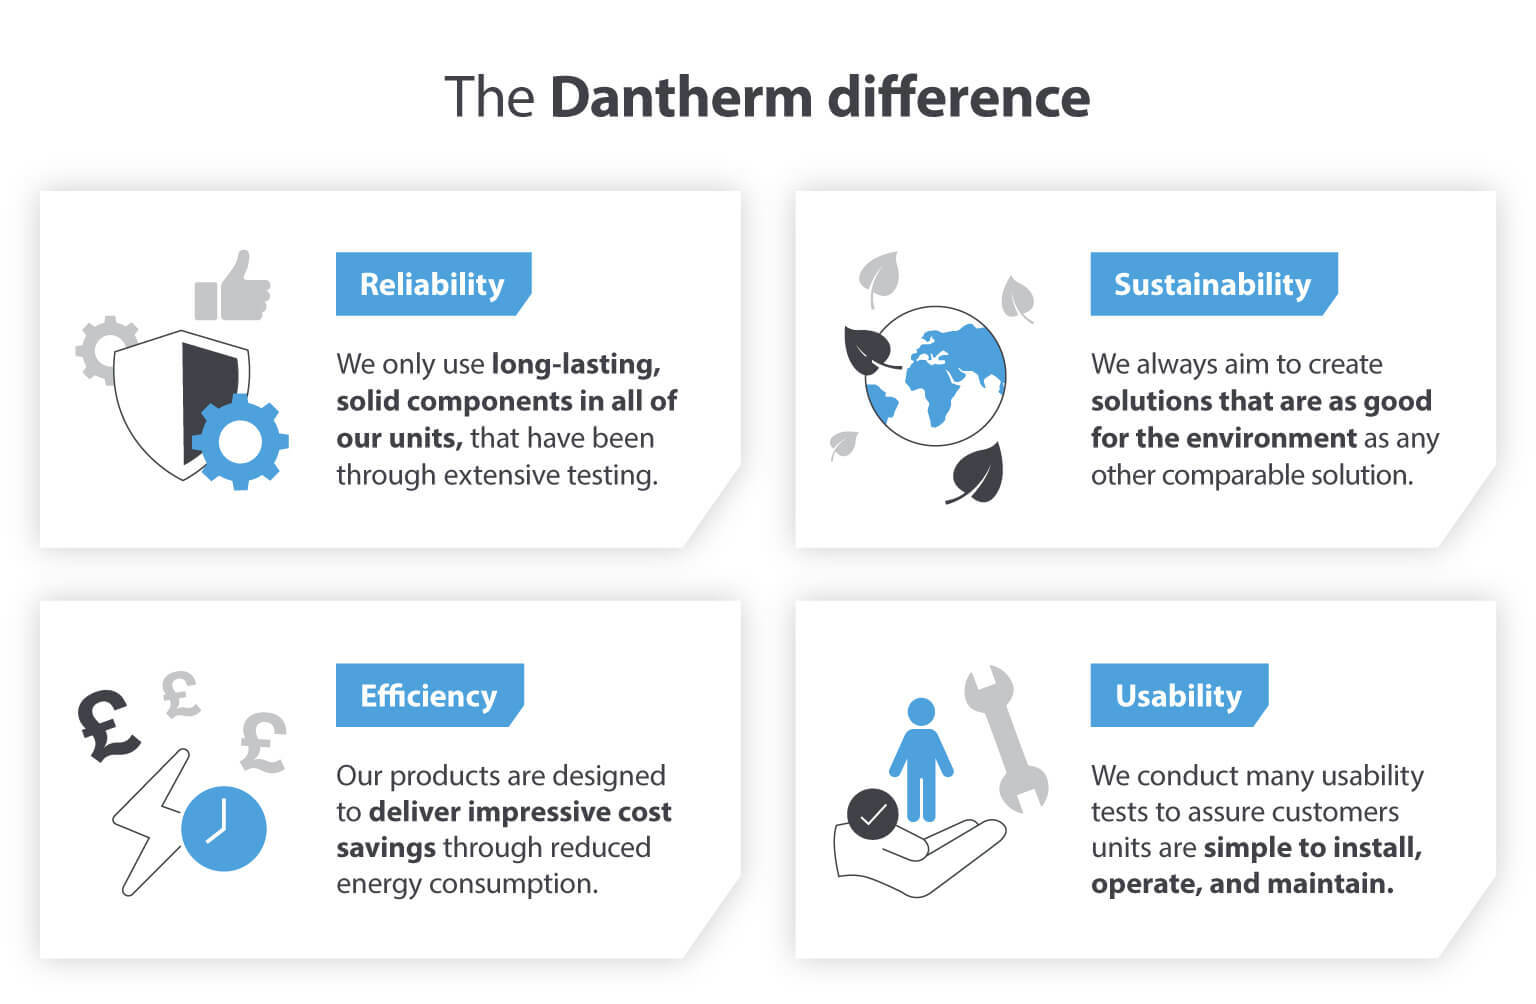 The Dantherm difference